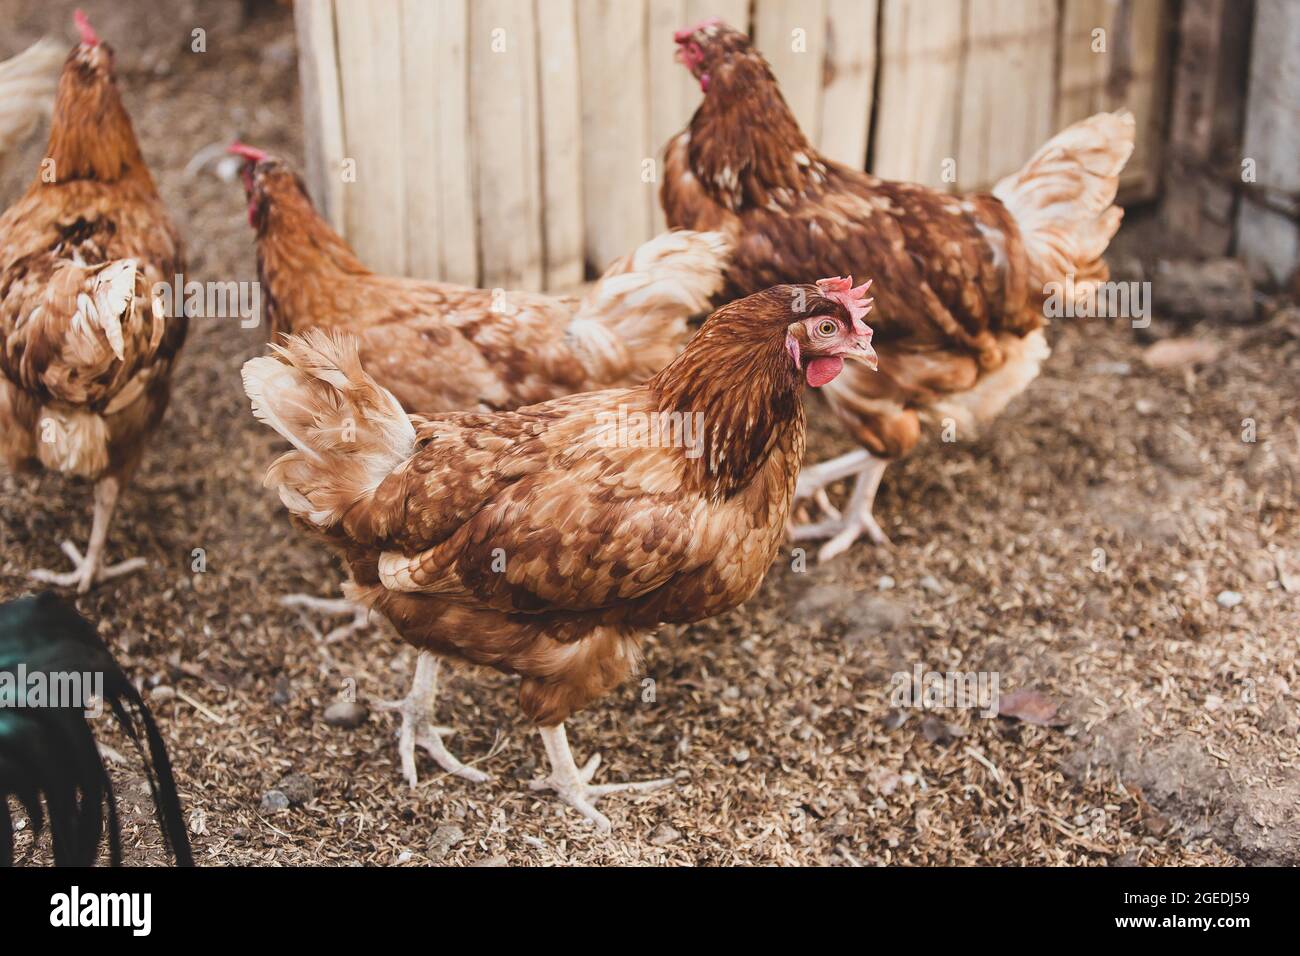 A small flock of free range brown hen. Free range meat chickens. Organic farm, livestock, agriculture concepts. Close-up. Stock Photo